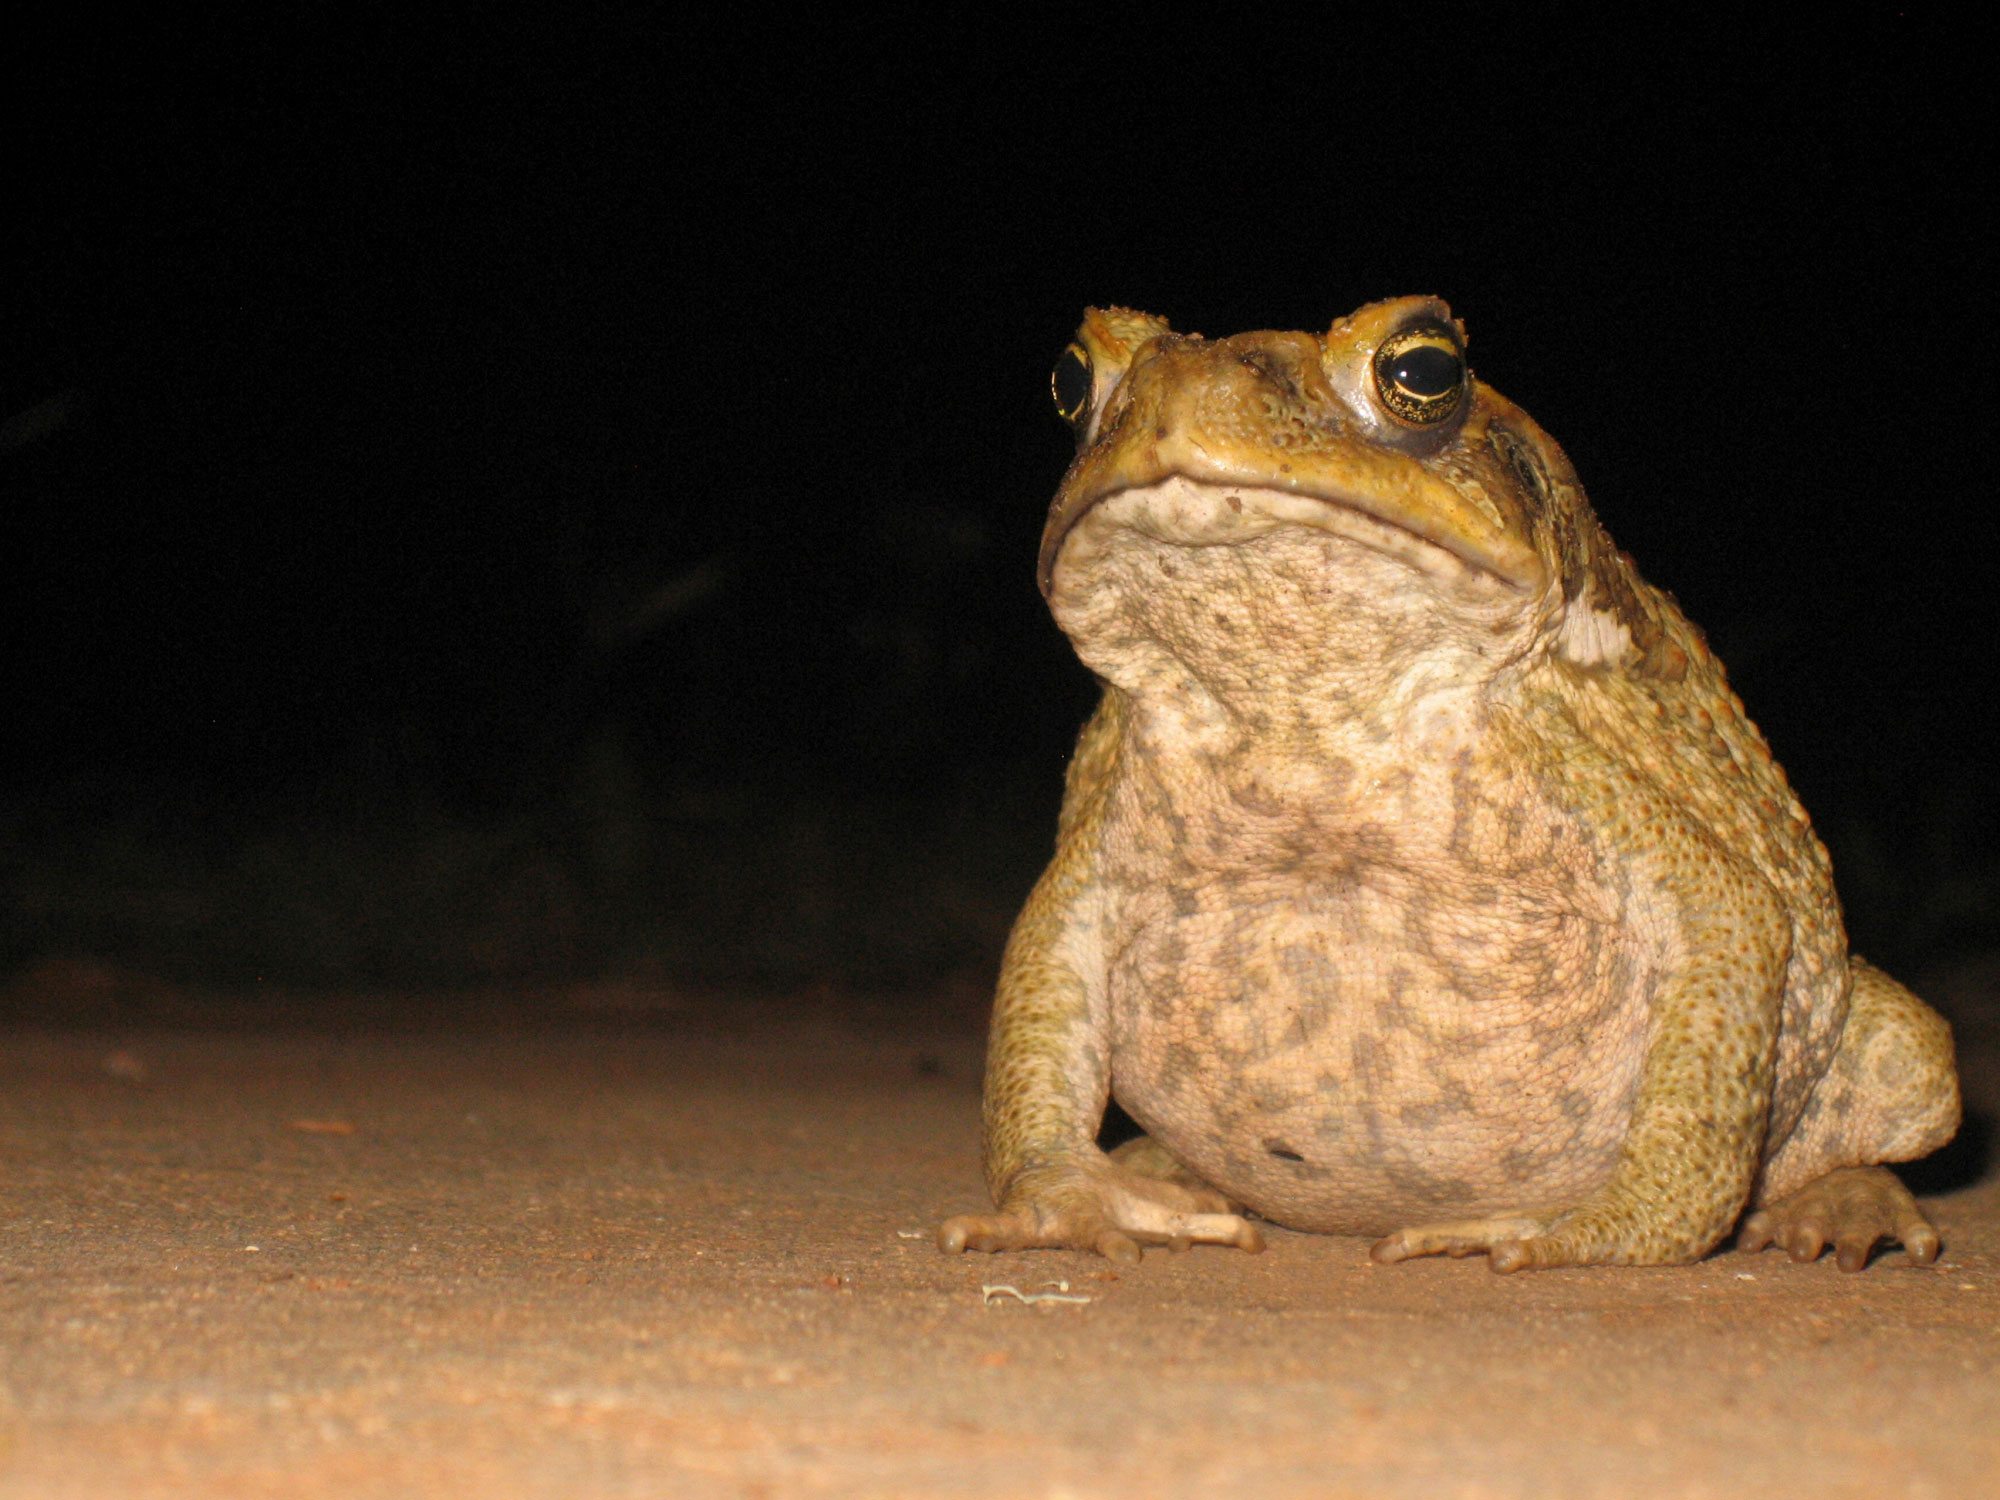 A cane toad in Litchfield National Park, Northern Territory.